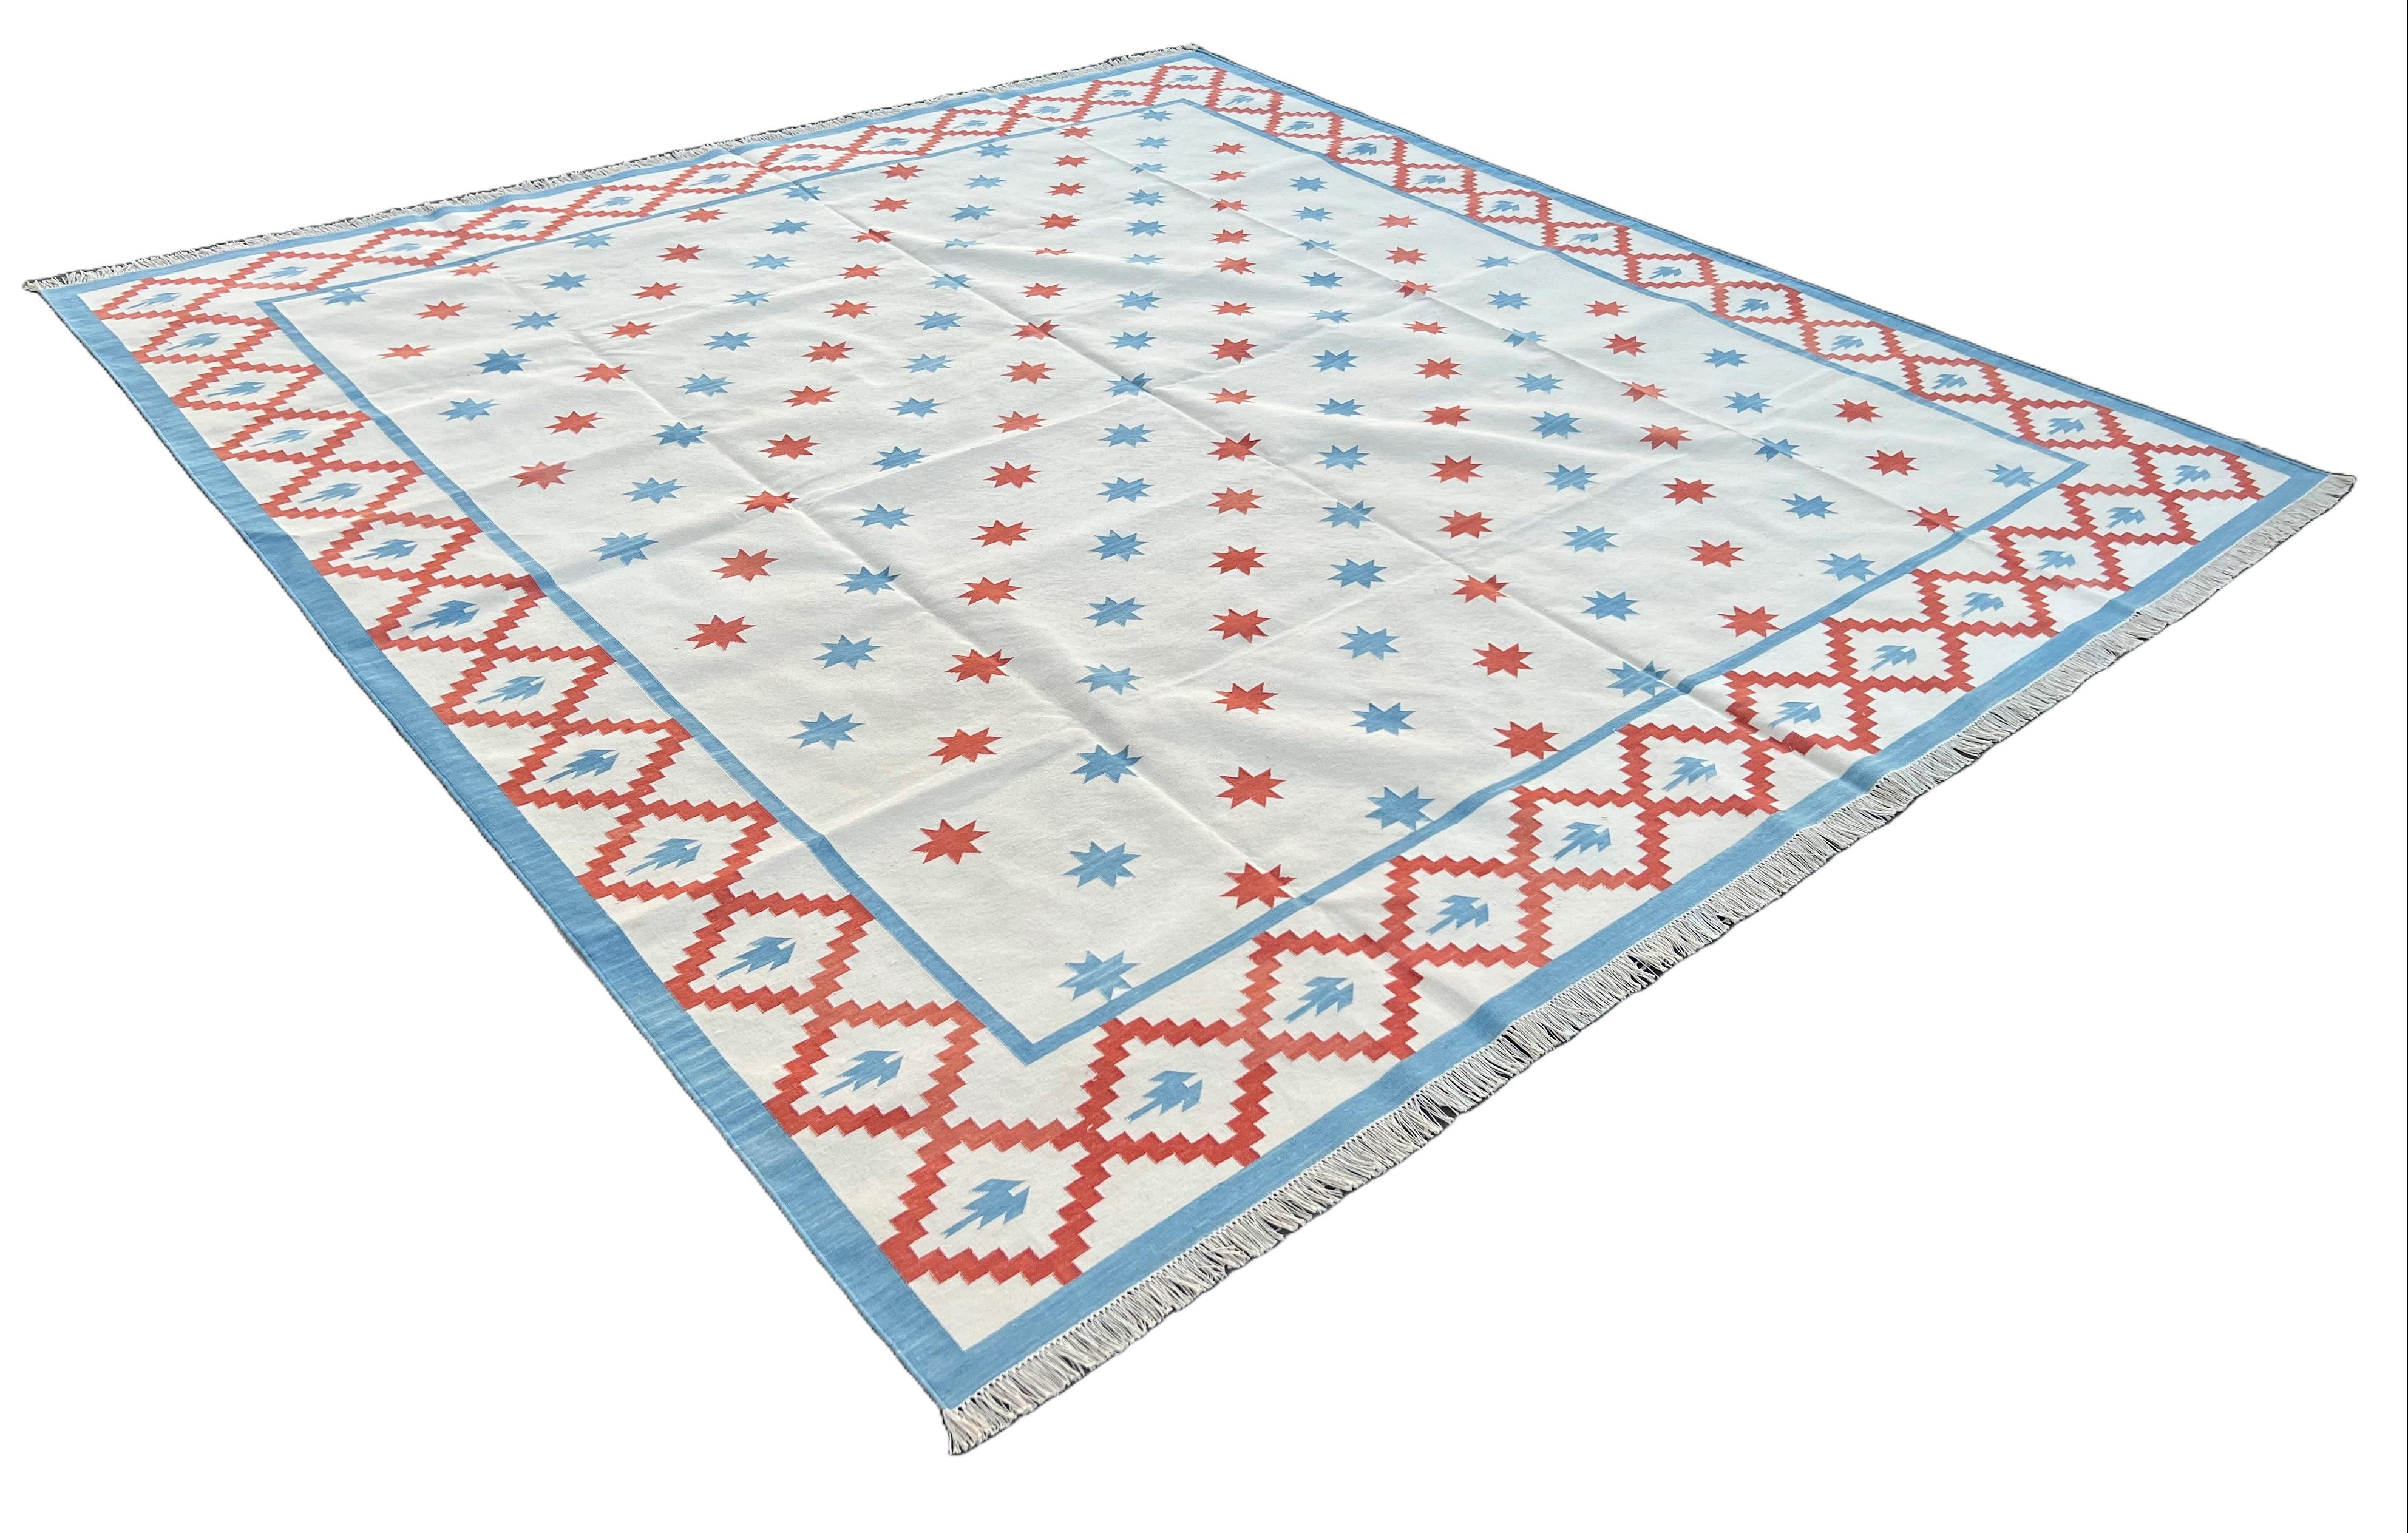 Cotton Vegetable Dyed Reversible Cream & Brown Indian Star Geometric Rug - 8'x10'
These special flat-weave dhurries are hand-woven with 15 ply 100% cotton yarn. Due to the special manufacturing techniques used to create our rugs, the size and color